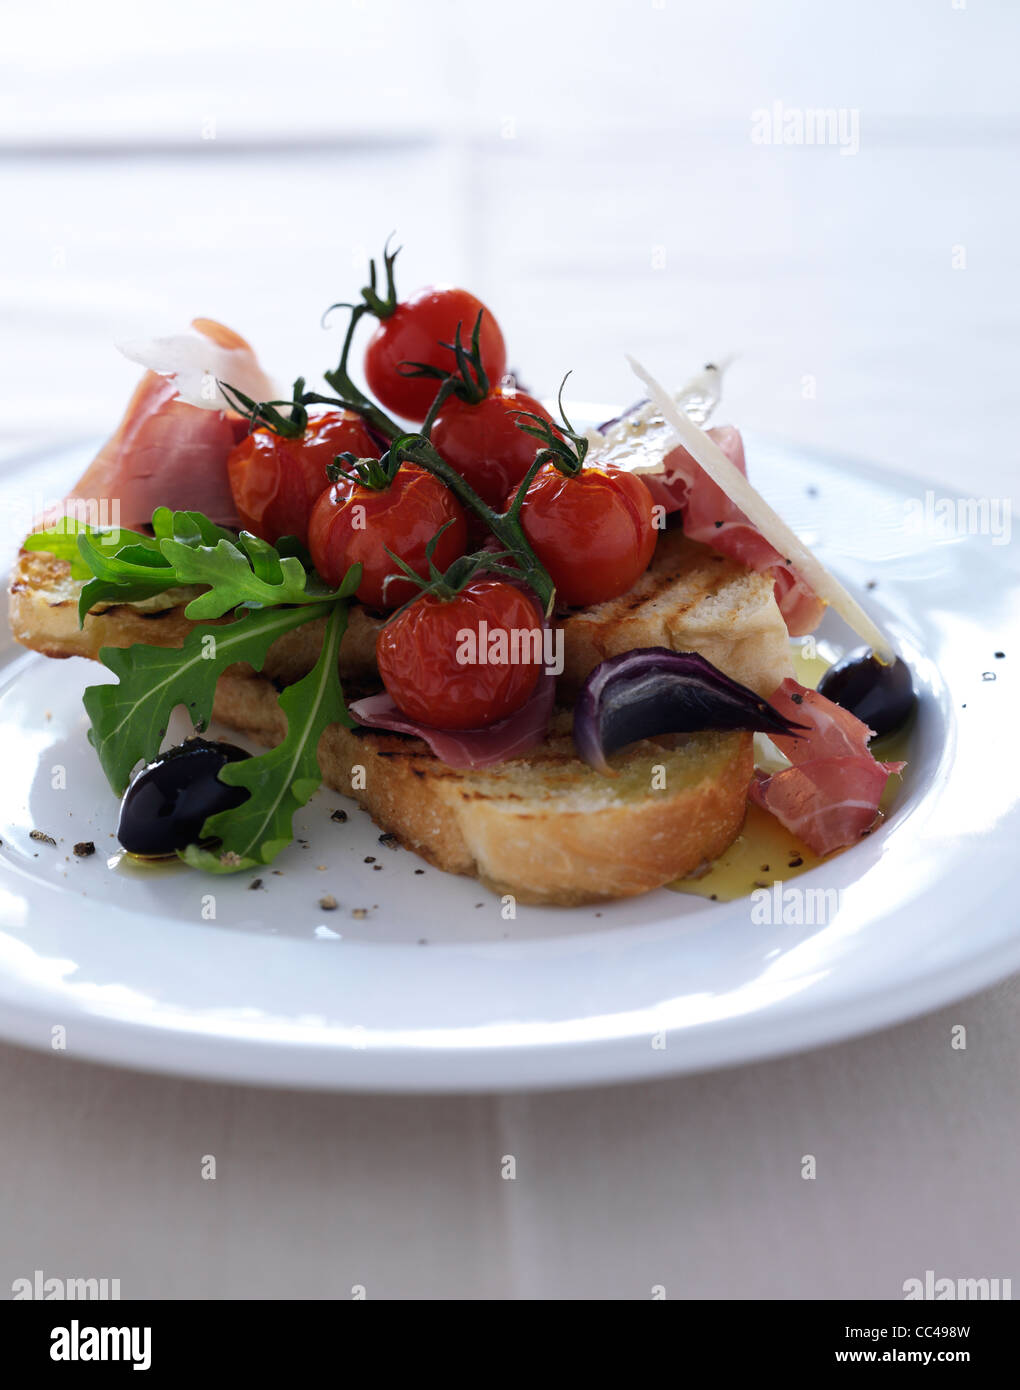 bruschetta with roasted vegetables parma ham and parmesan shavings Stock Photo